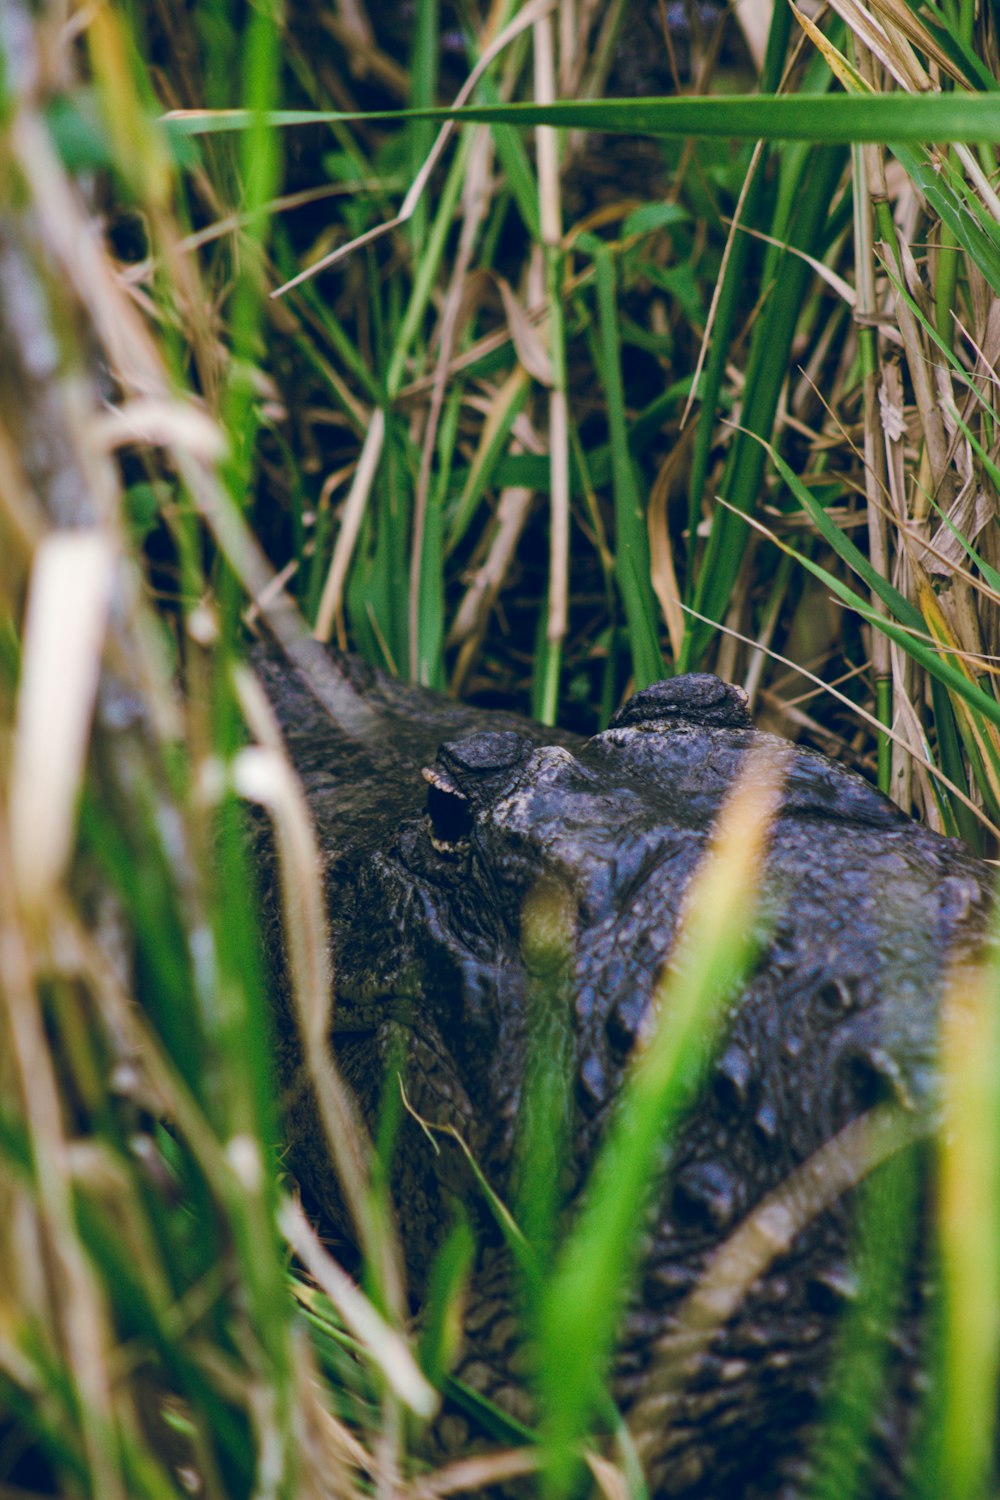 a close up of an alligator in the grass